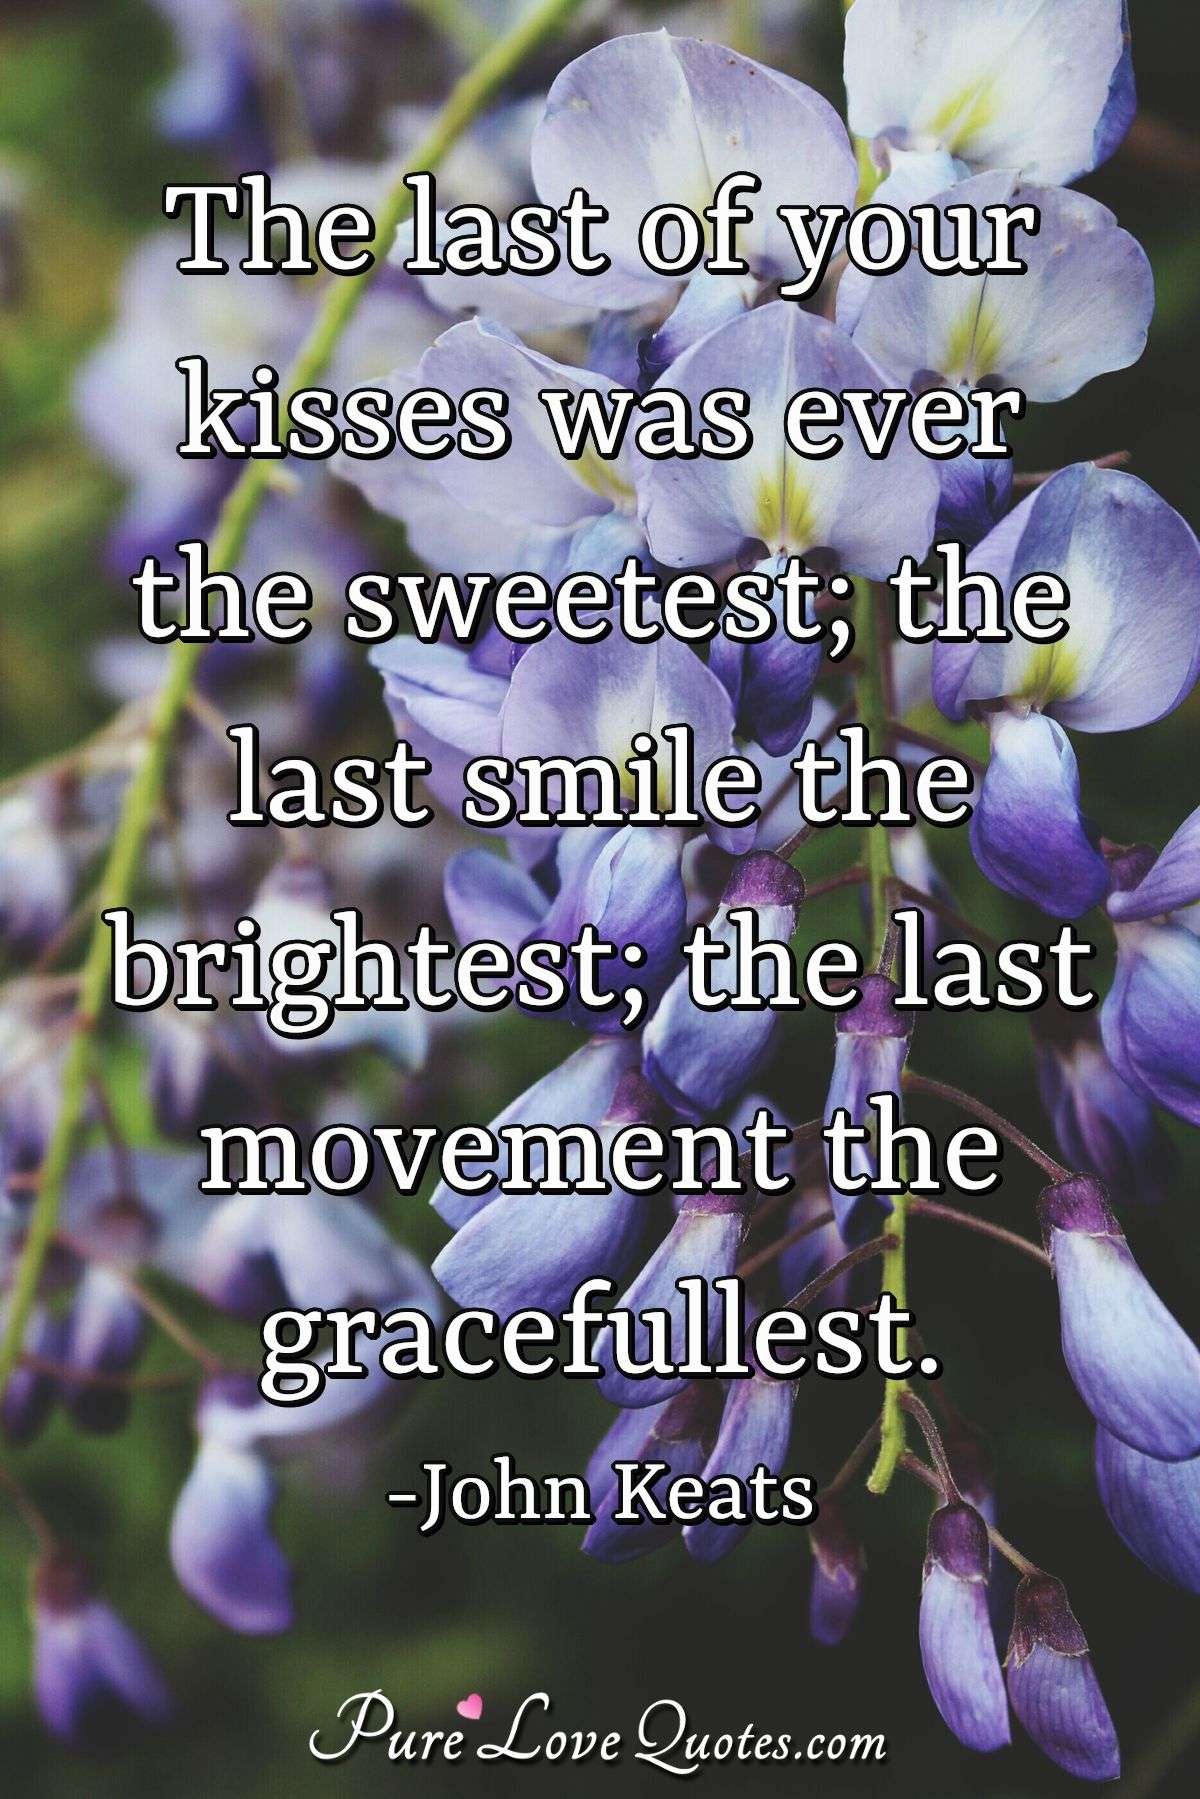 The last of your kisses was ever the sweetest; the last smile the brightest; the last movement the gracefullest. - John Keats